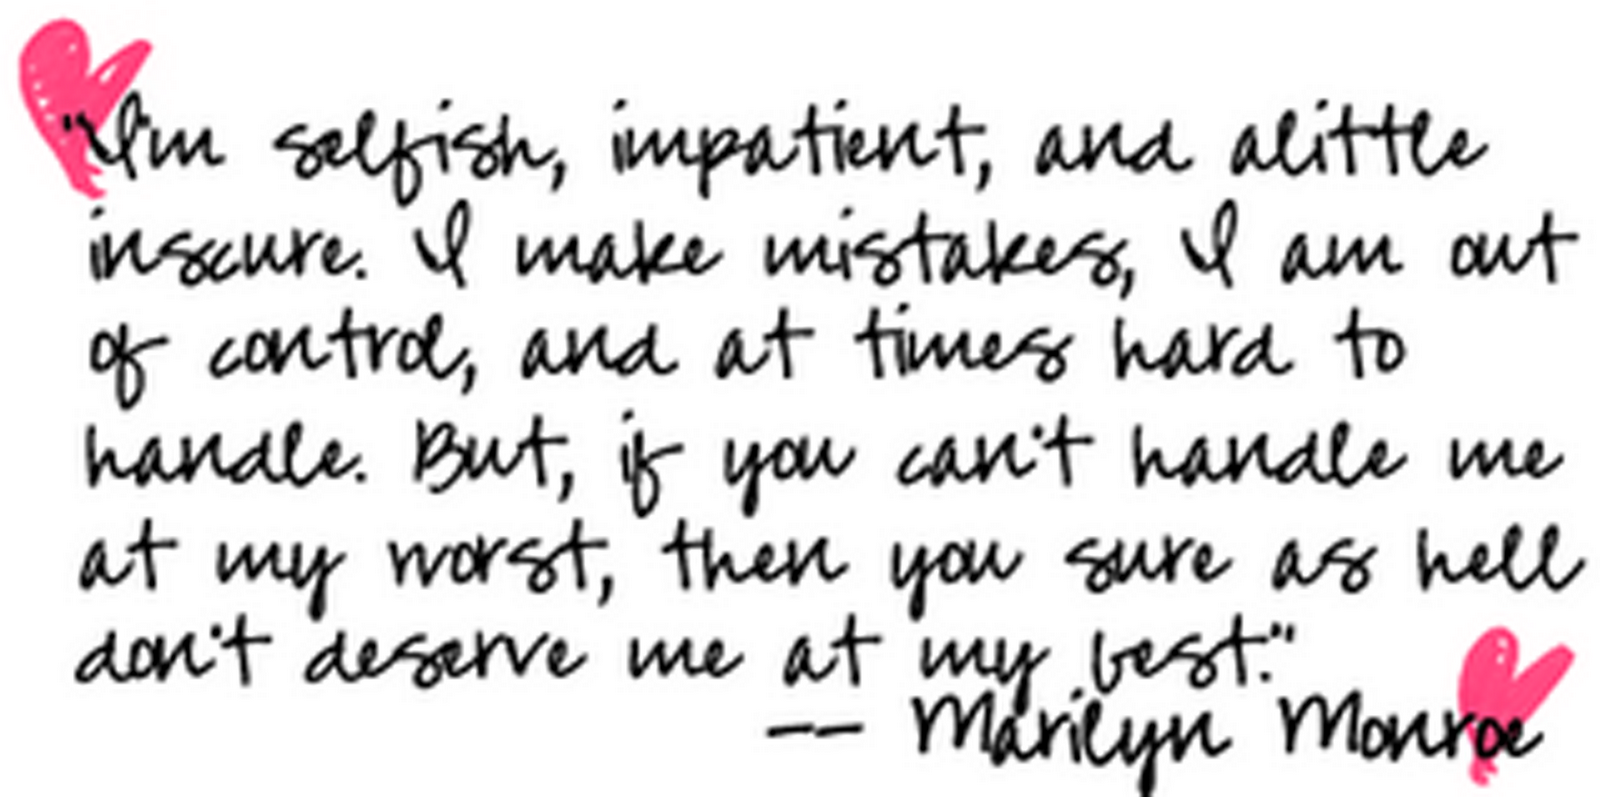 Marilyn Monroe Quotes And Sayings Imperfection Hd Marilyn - HD Wallpaper 